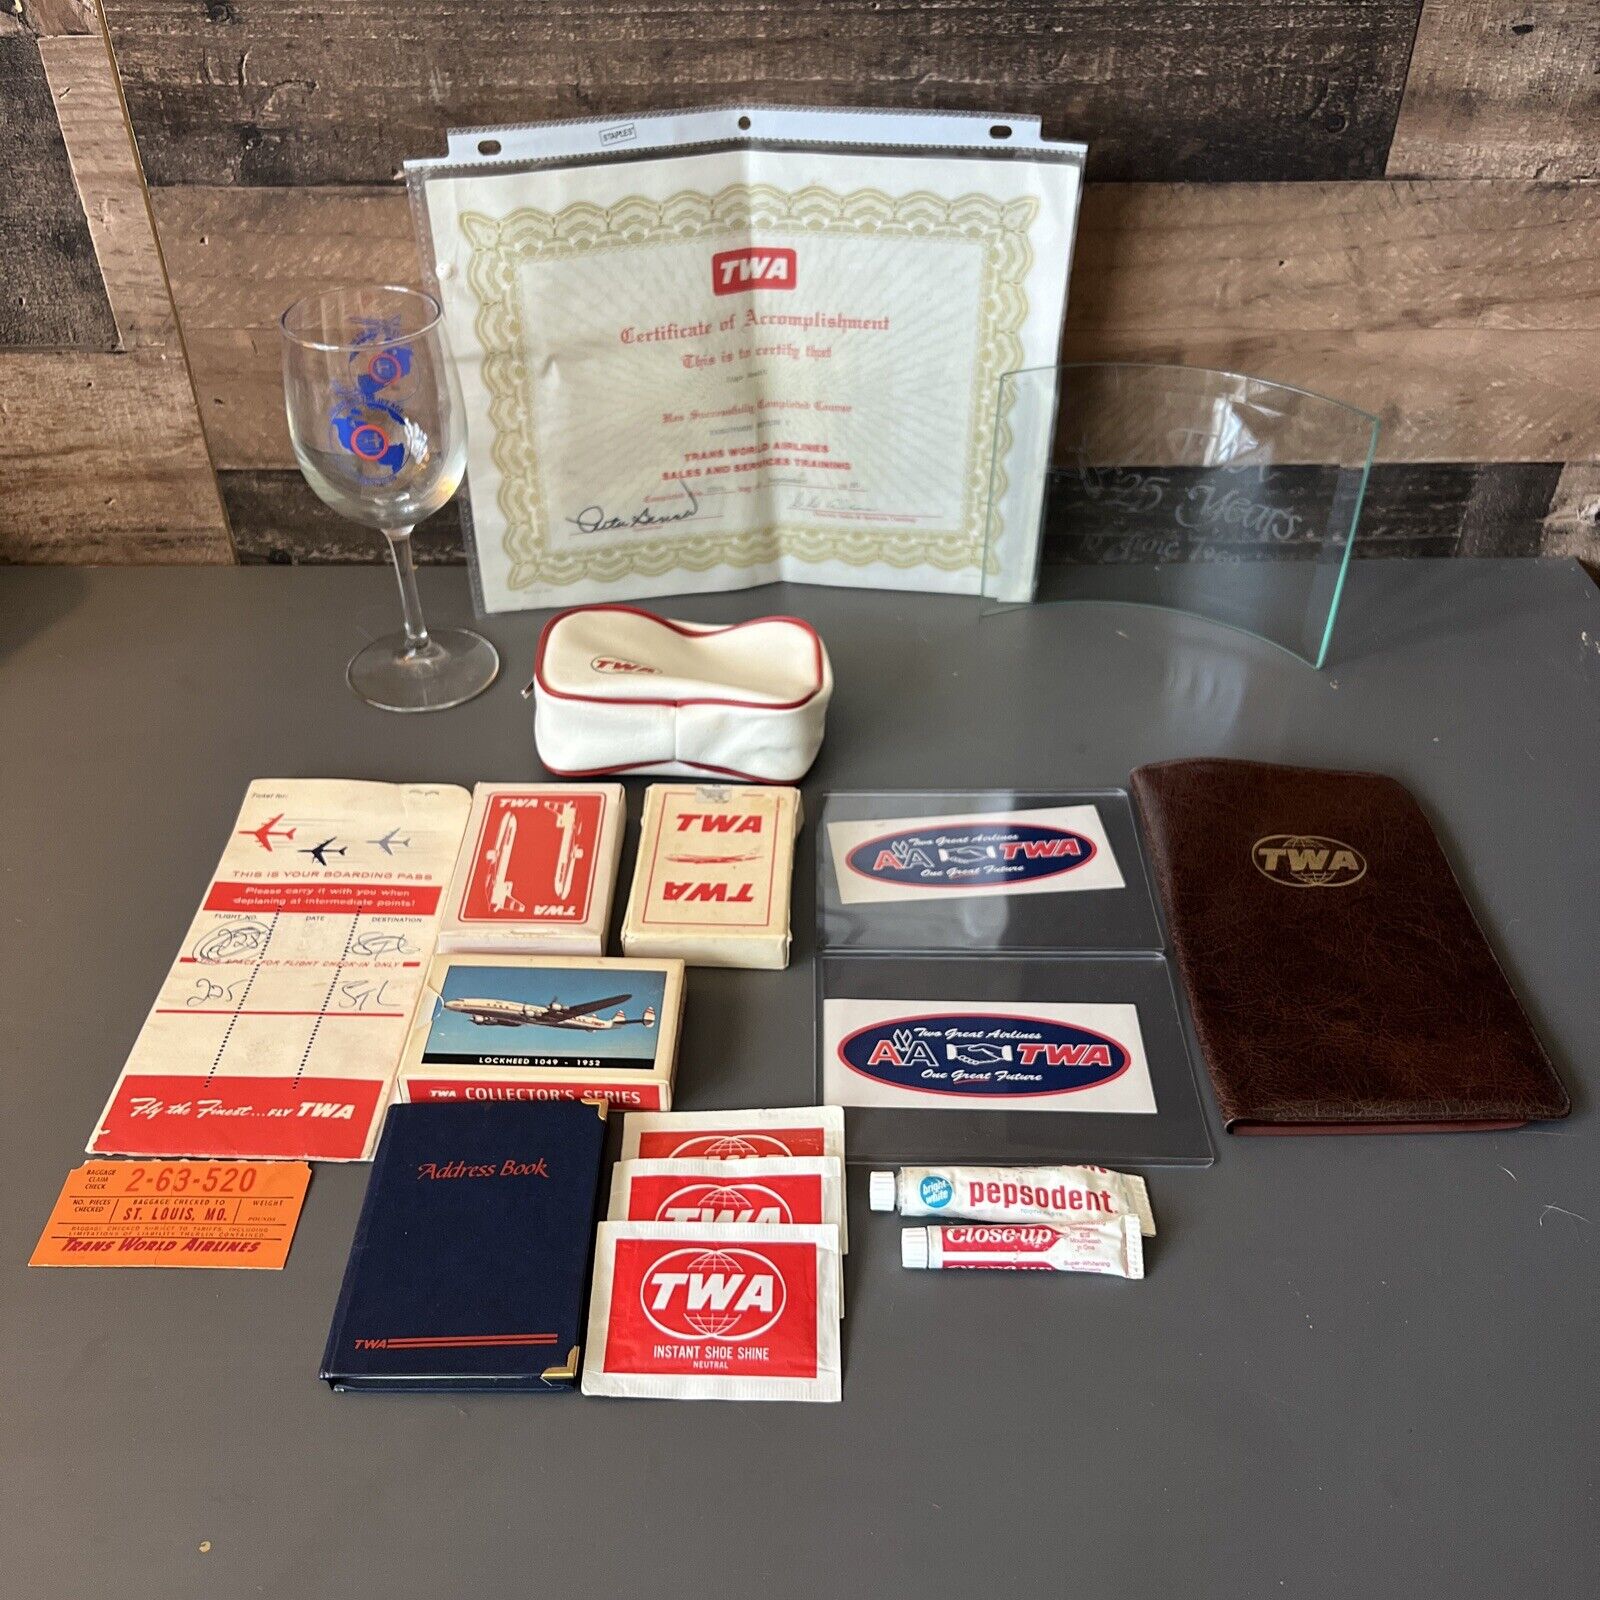 HUGE Vintage TWA Lot - Playing Cards, Boarding Pass, Wine Glass, Toiletry Bag